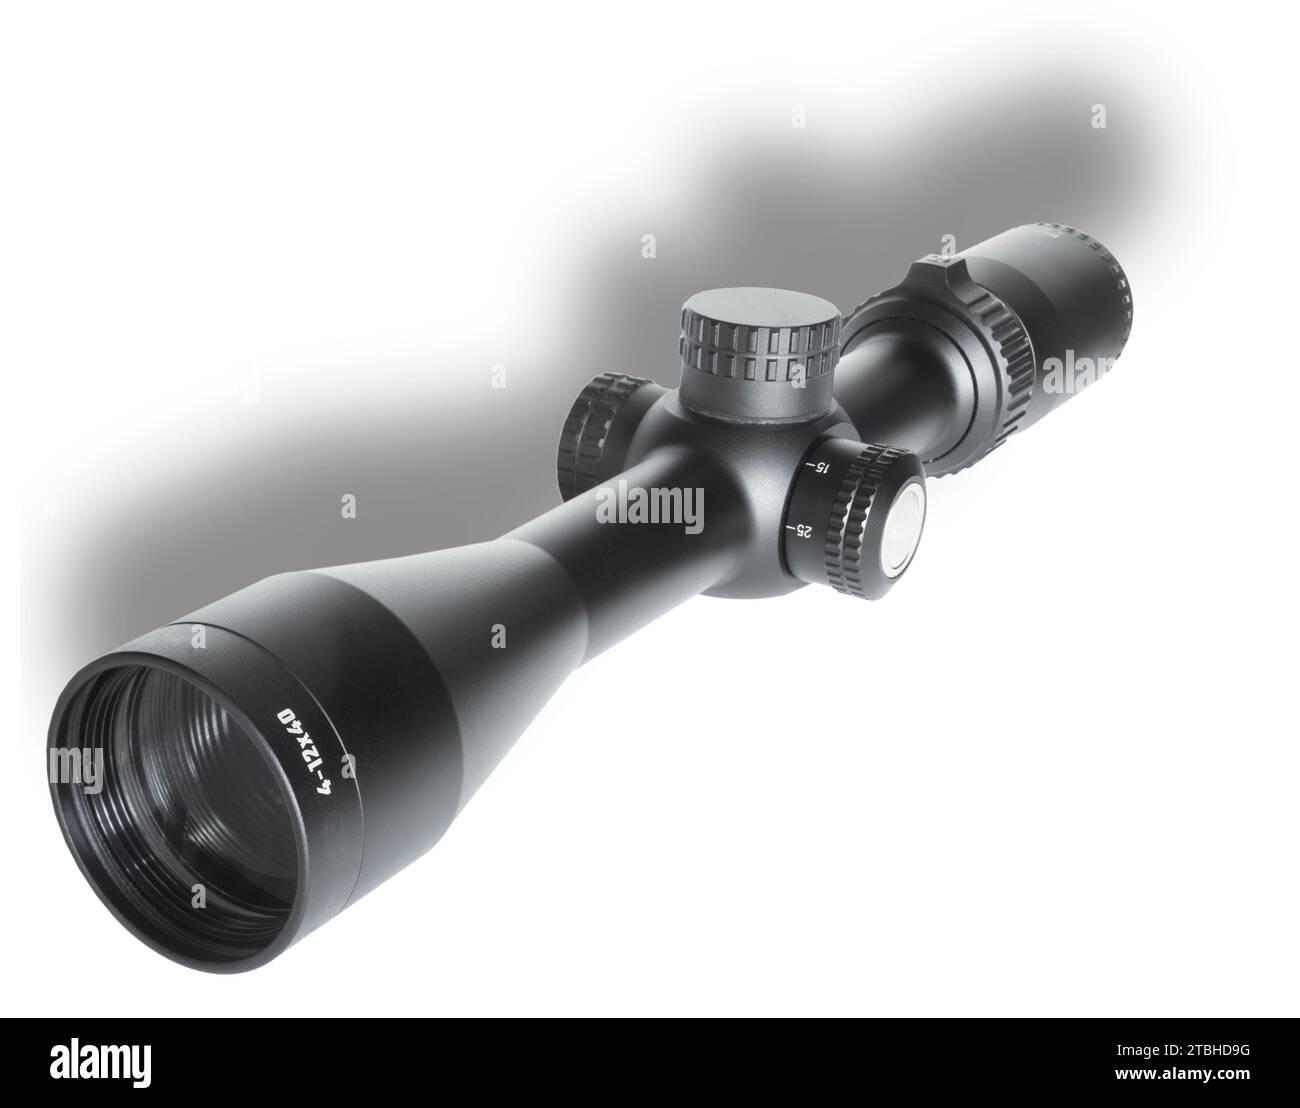 Drop shadow above a rifle scope with 4 to 12 magnification that has a dial for adjusting parallax Stock Photo